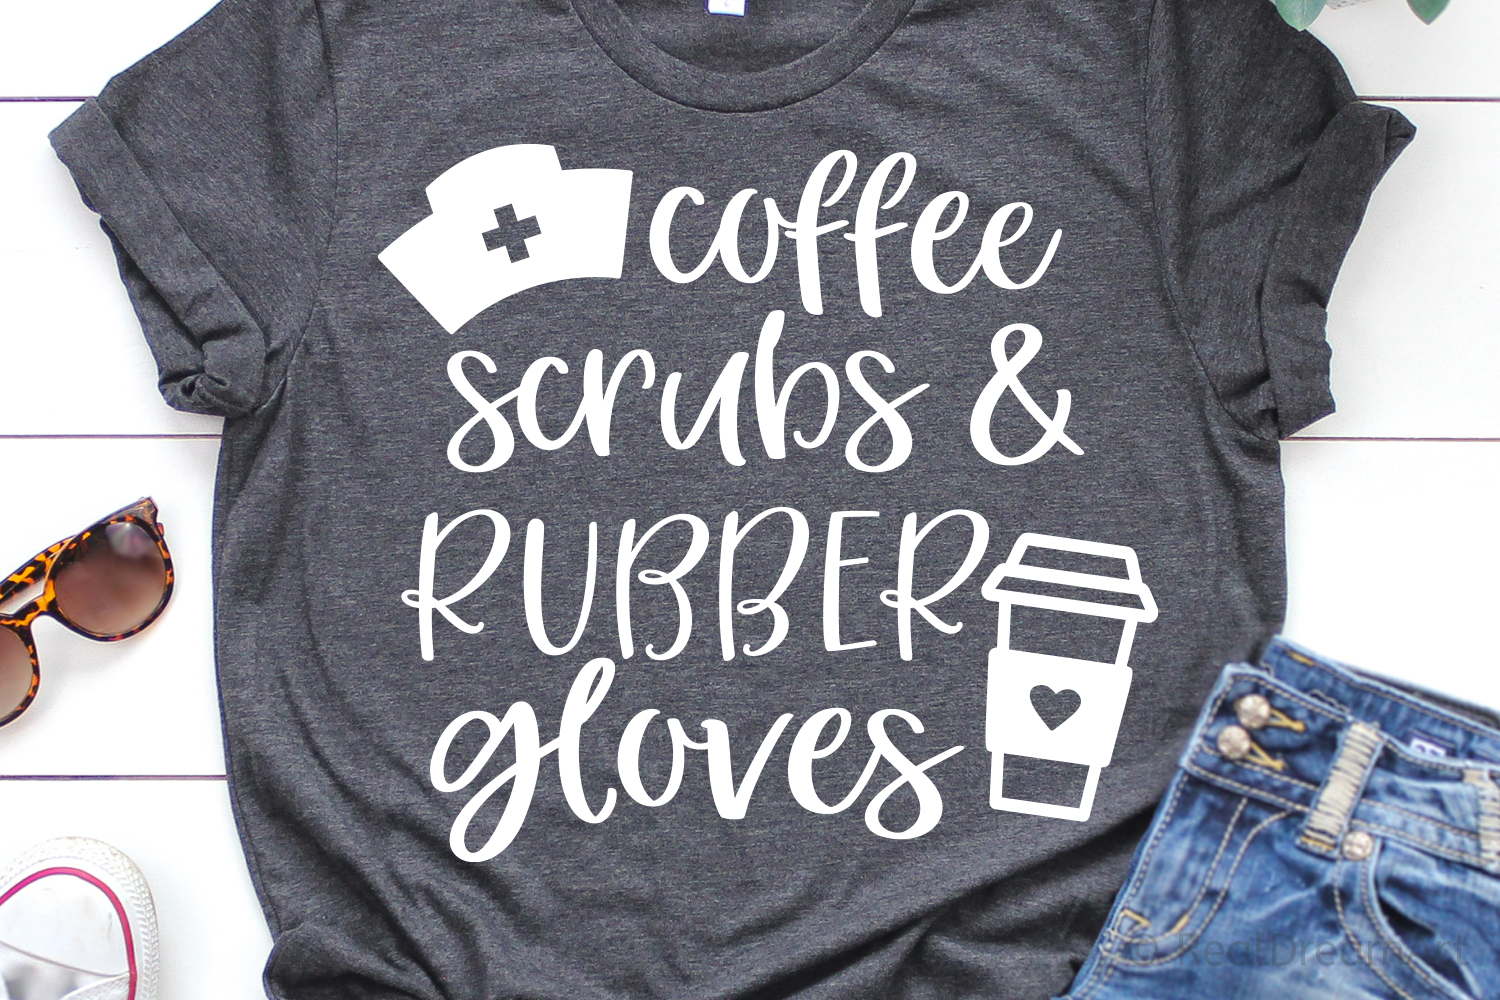 Download Coffee Scrubs & Rubber Gloves SVG, DXF, PNG, EPS (536756 ...